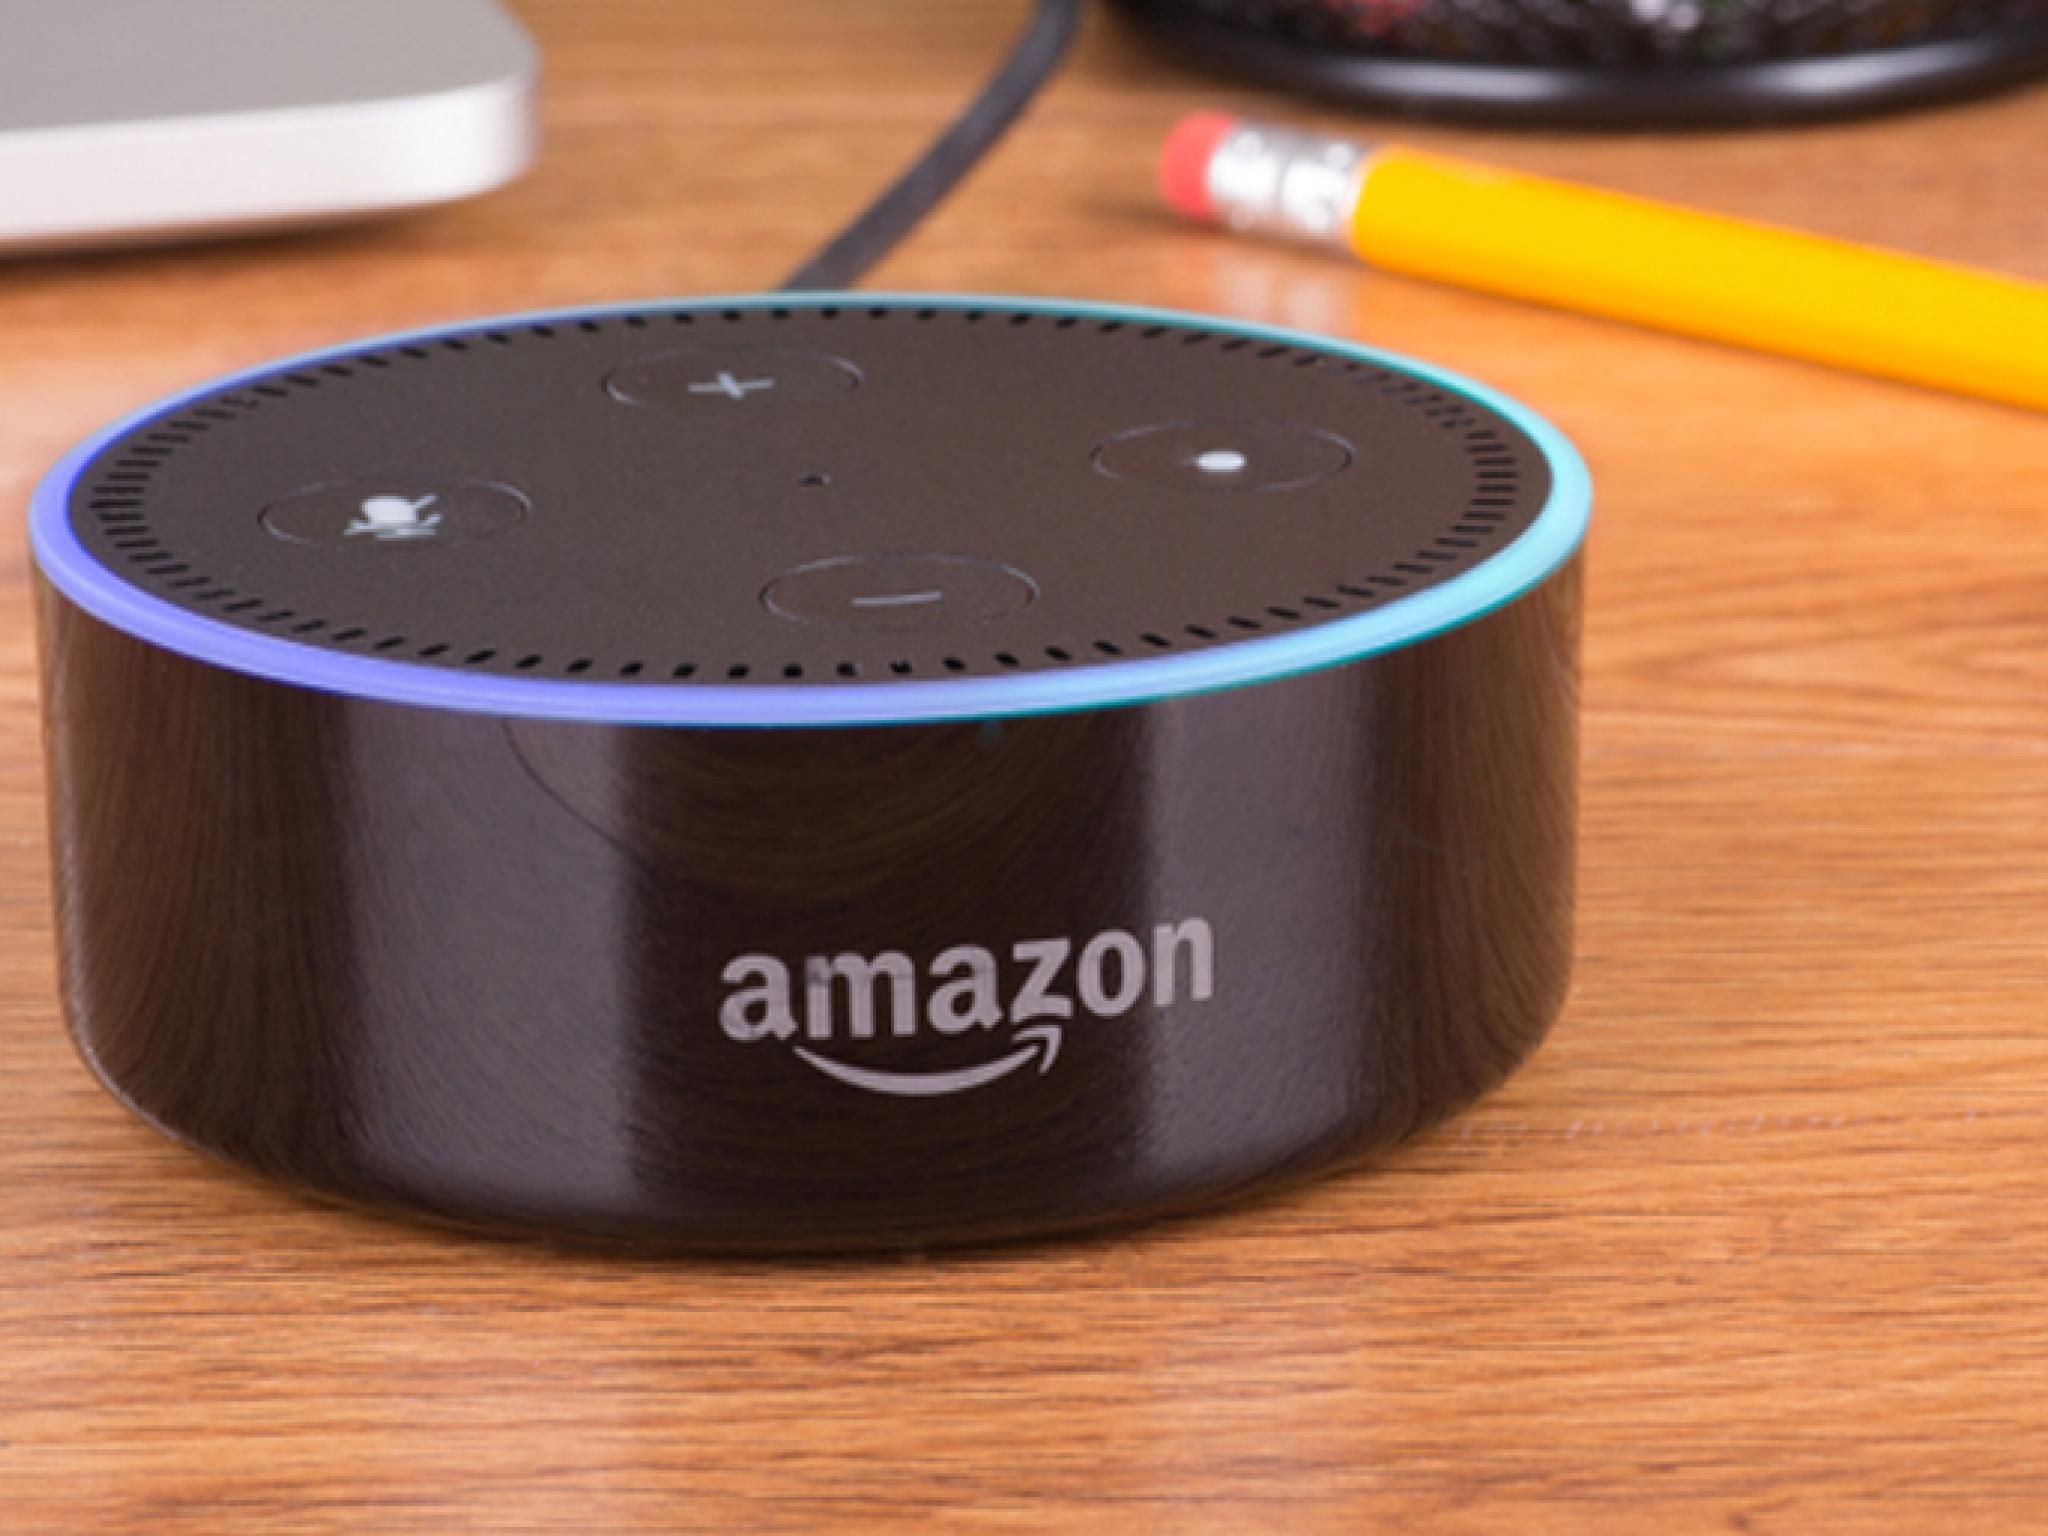  amazon-plans-major-alexa-overhaul-with-ai-powered-features-report 